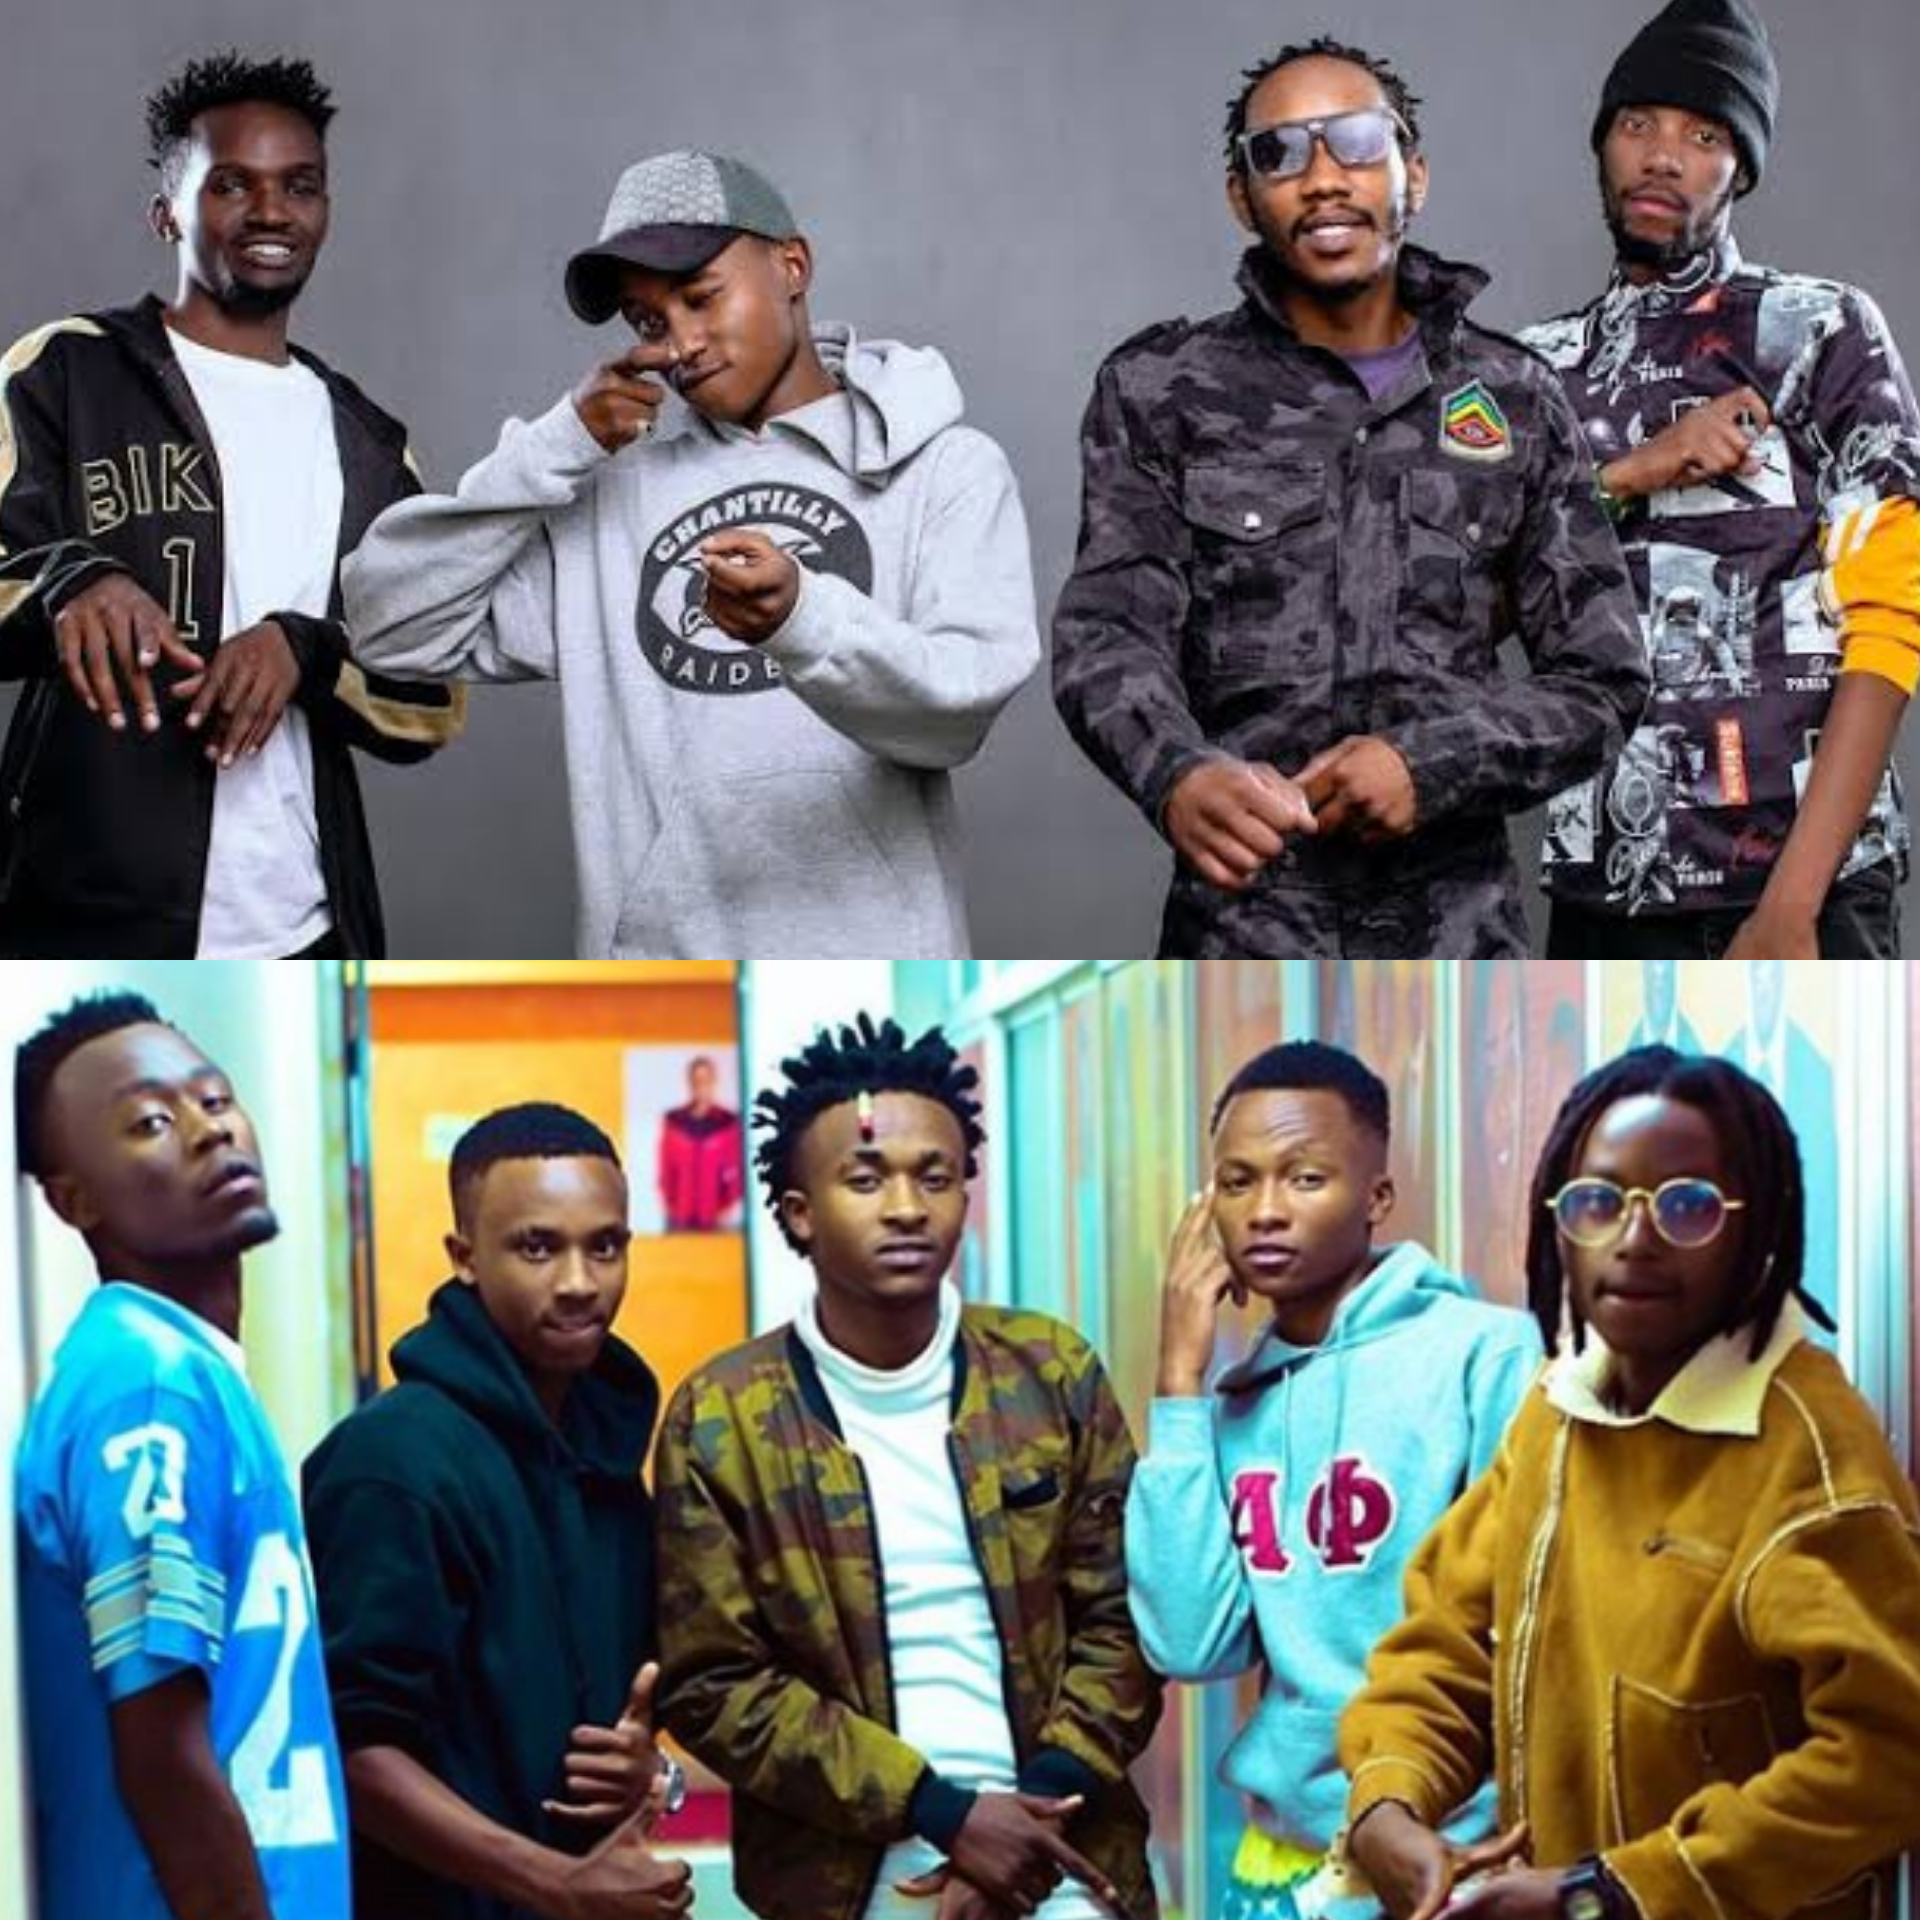 Ethic Vs Sailors Gang: Which group is the baddest?